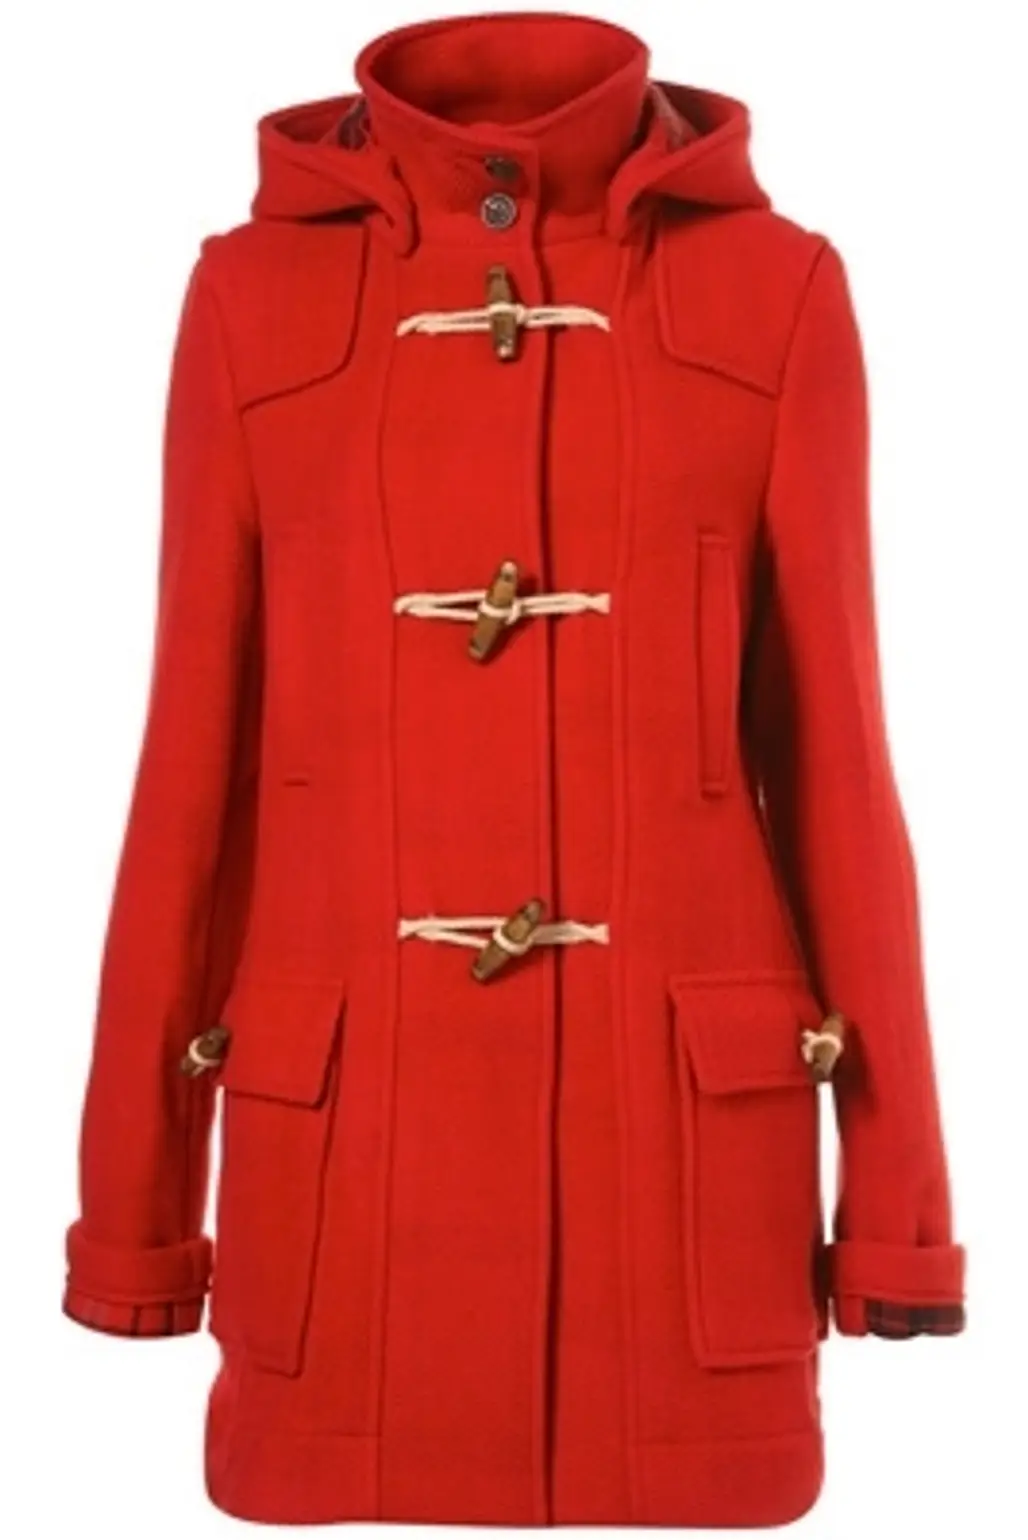 Topshop Red Bound Seamed Duffel Coat